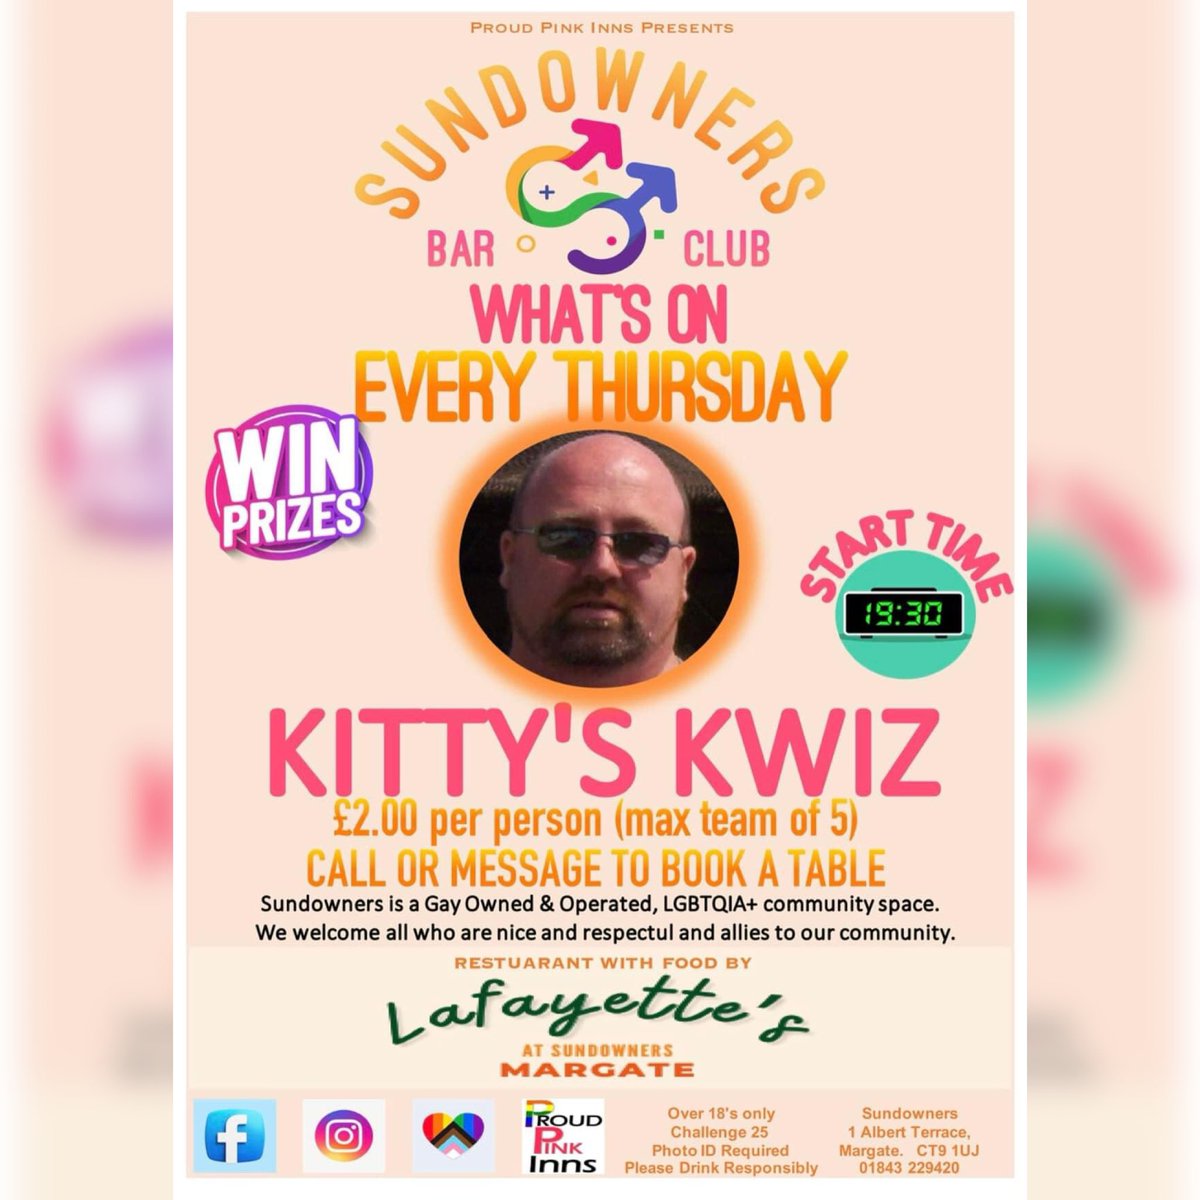 🏆 Last week’s Kitty’s Kwiz resulted in a draw between two teams of gorgeous Sundowners regulars. 

📅 Kitty’s Kwiz is every Thursday - call or message to book a table!